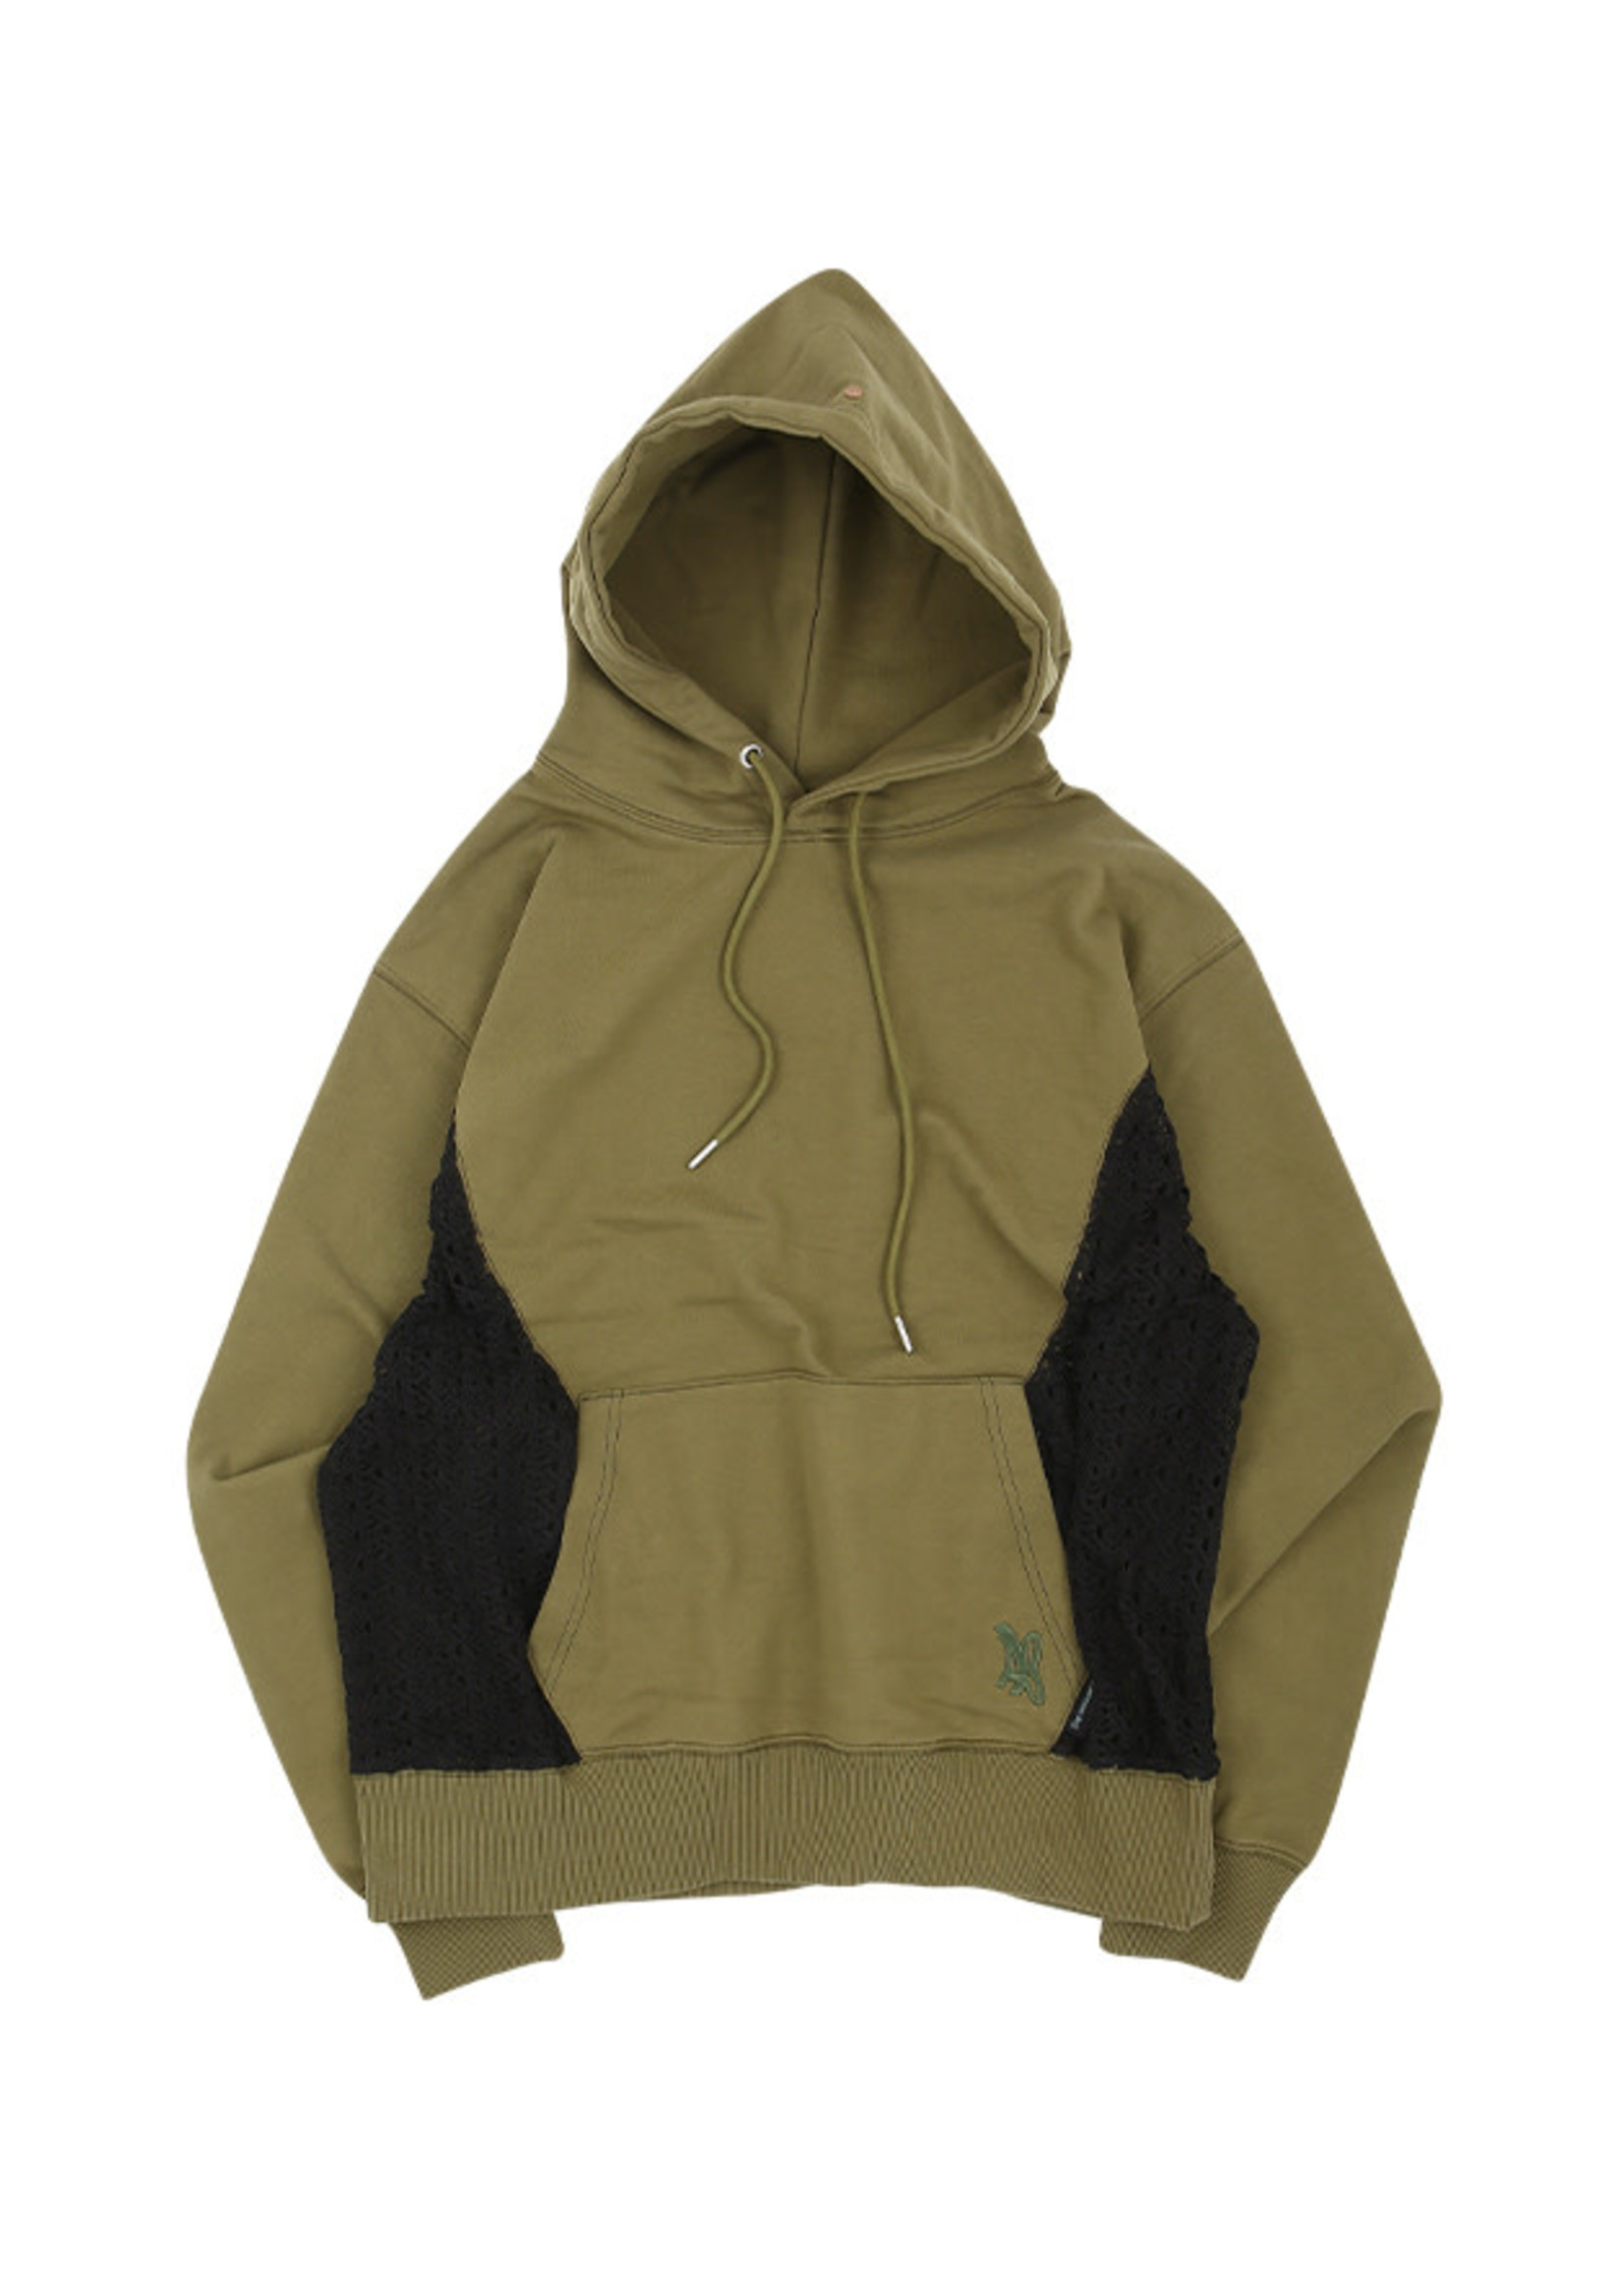 ANDERSSON BELL Lace Panel Hoodie in Khaki and Black